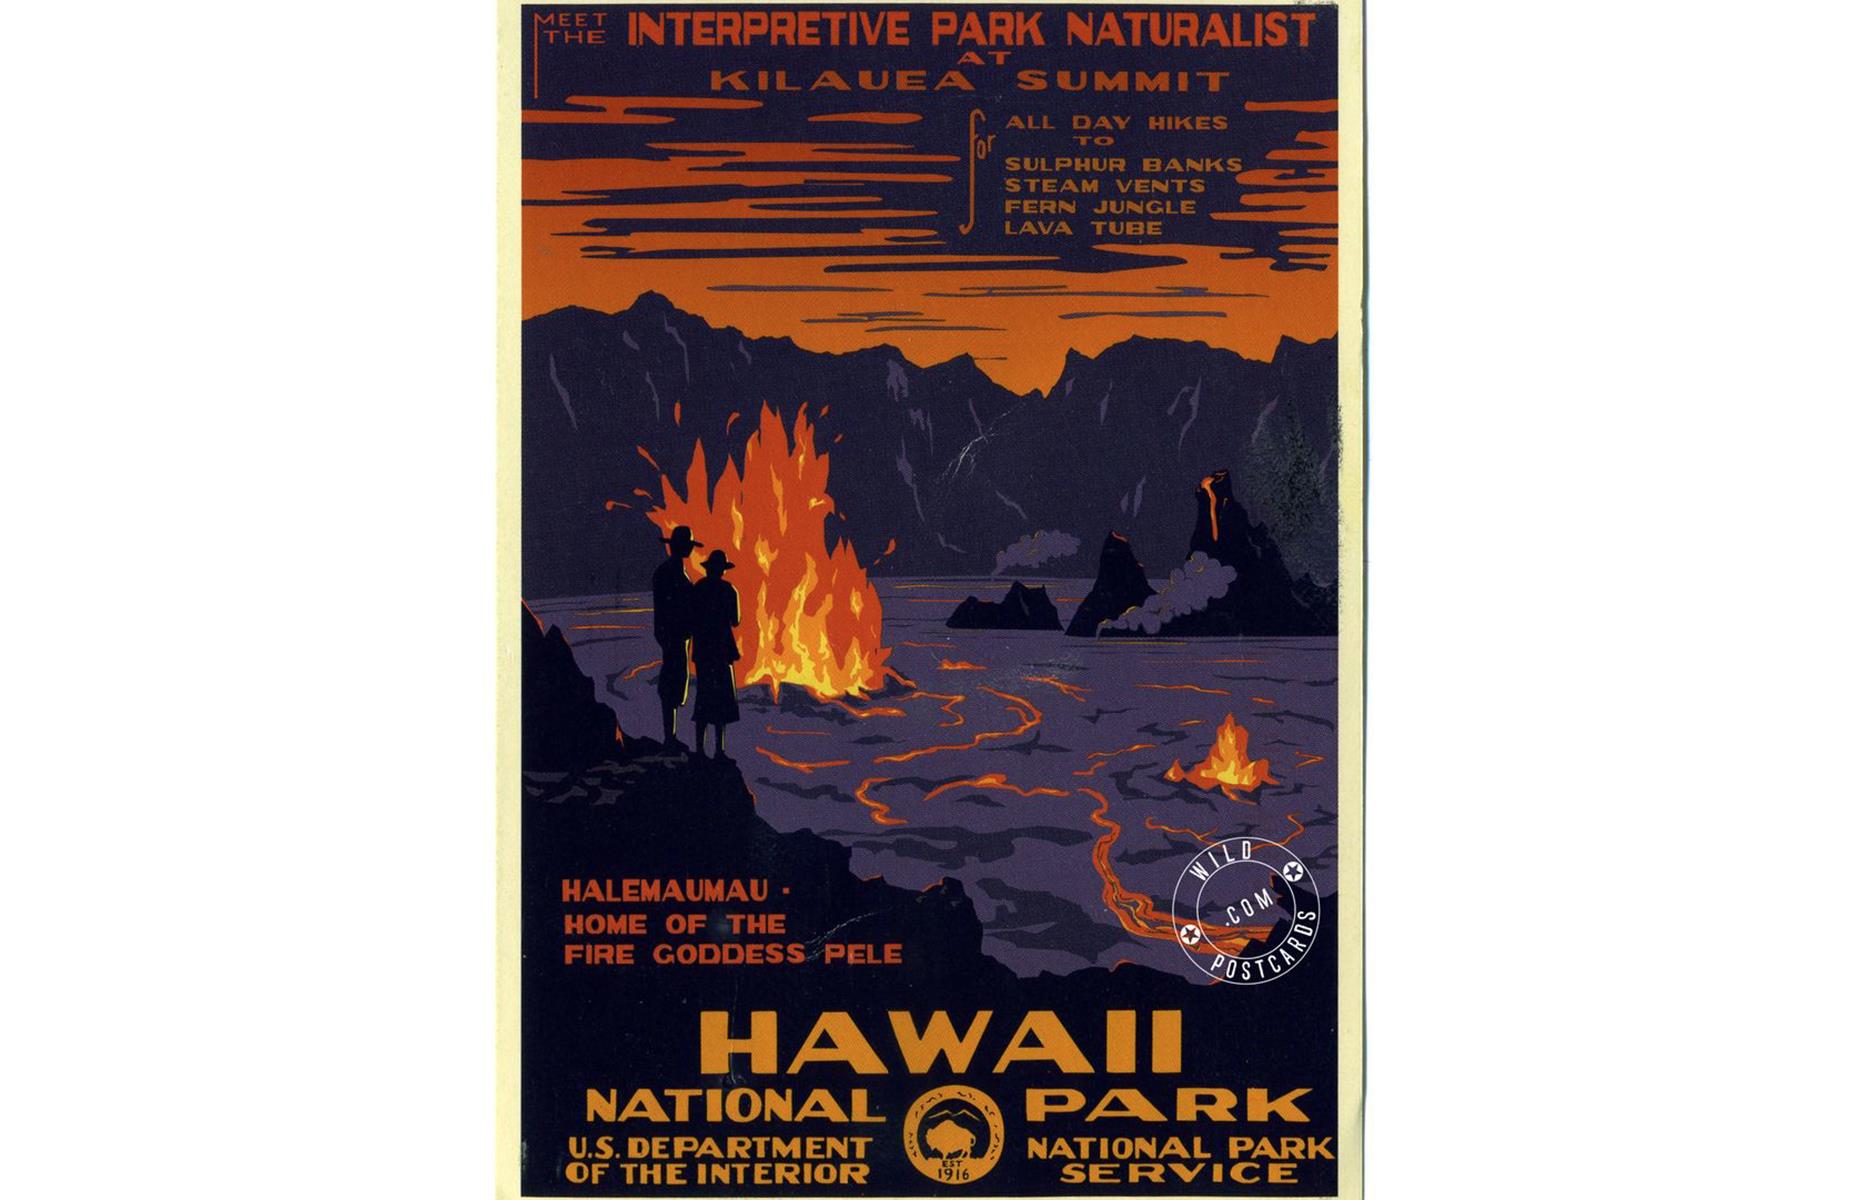 <p>This moody poster advertises what is now Hawaii Volcanoes National Park. It shows the earth cracked with lava and the sky blazing orange as travelers look on from the rim of the burning Halemaʻumaʻu crater – "home of the fire goddess Pele". The poster also promotes hikes across the volcanic terrain and naturalist-led activities. </p>  <p><a href="https://www.loveexploring.com/gallerylist/73178/the-worlds-most-incredible-active-volcanoes-you-can-visit"><strong>Take a look at the world's most dangerous volcanoes</strong></a></p>